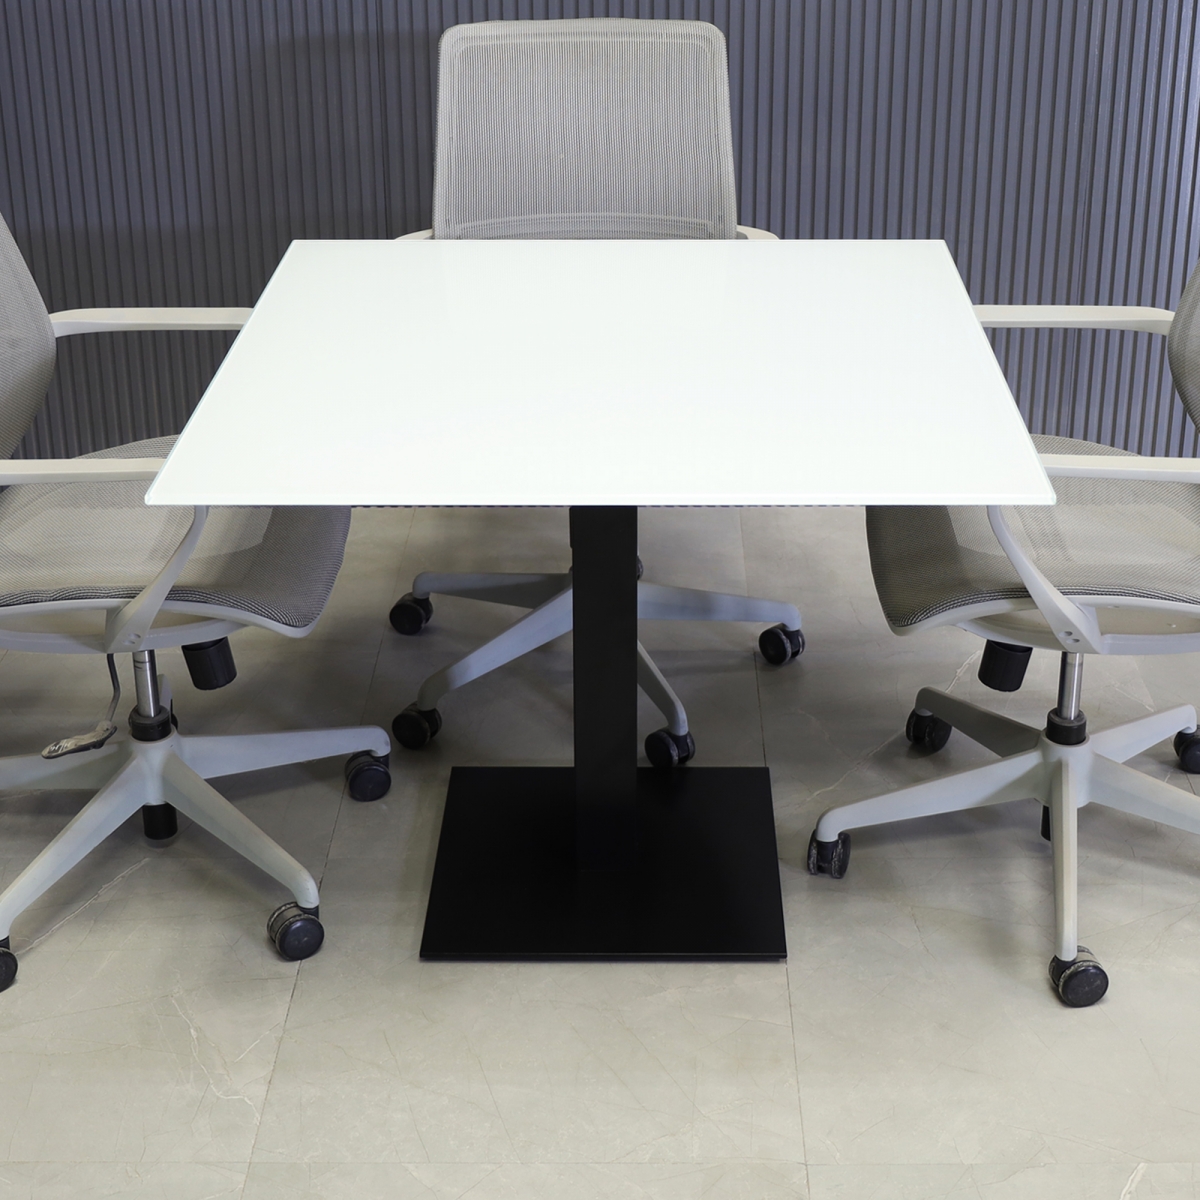 California Square Conference Table with Tempered Glass Top